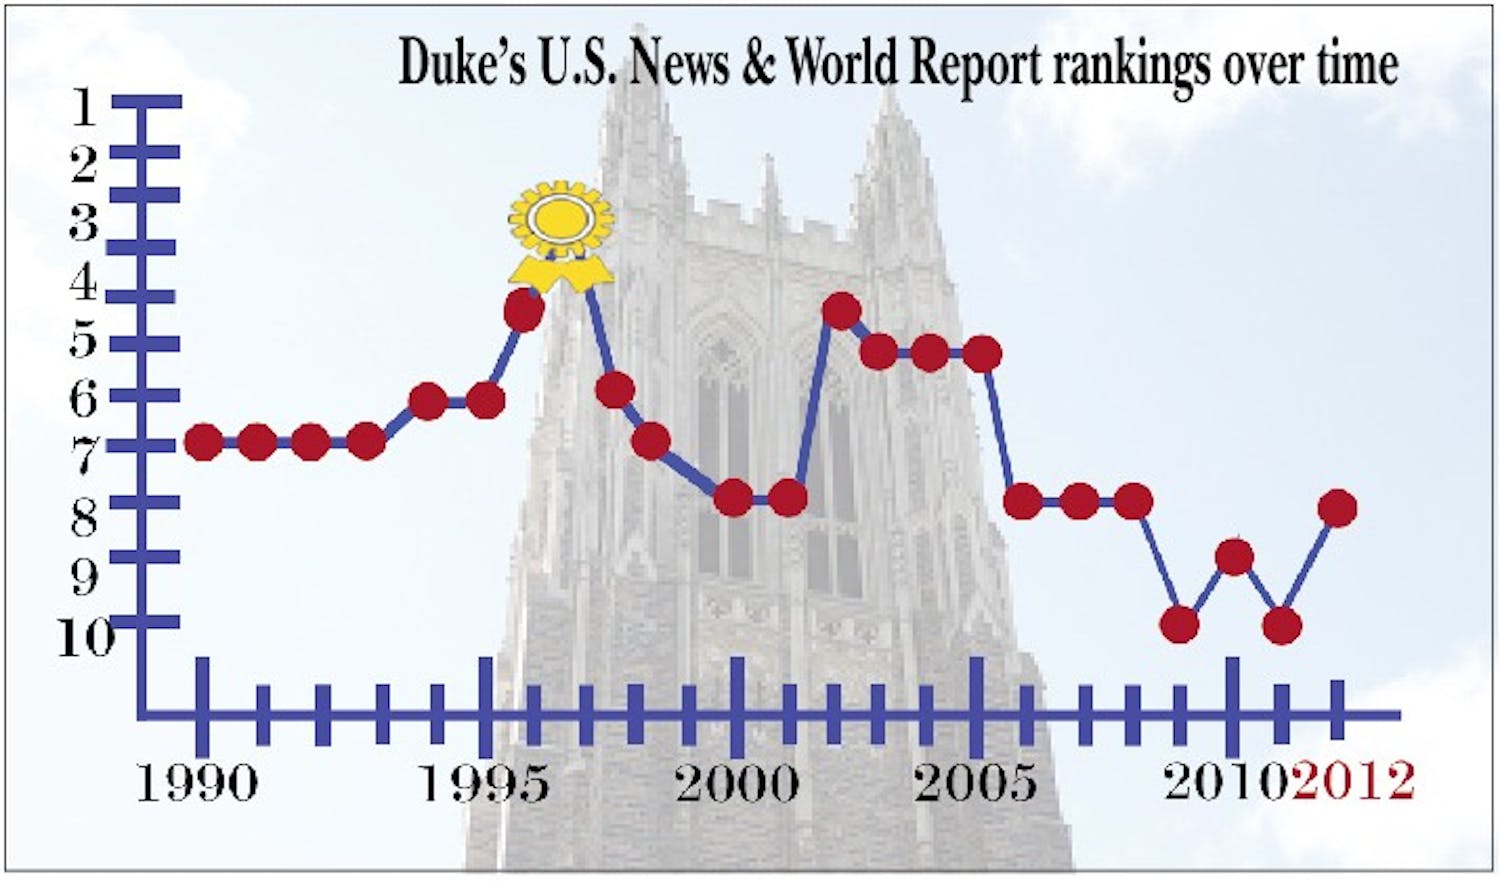 Duke’s rankings have fluctuated over the past two decades—with a peak as number three in 1997 and a low at number 10 in 2009 and 2011. This year, U.S. News & World Report ranks Duke as number eight.